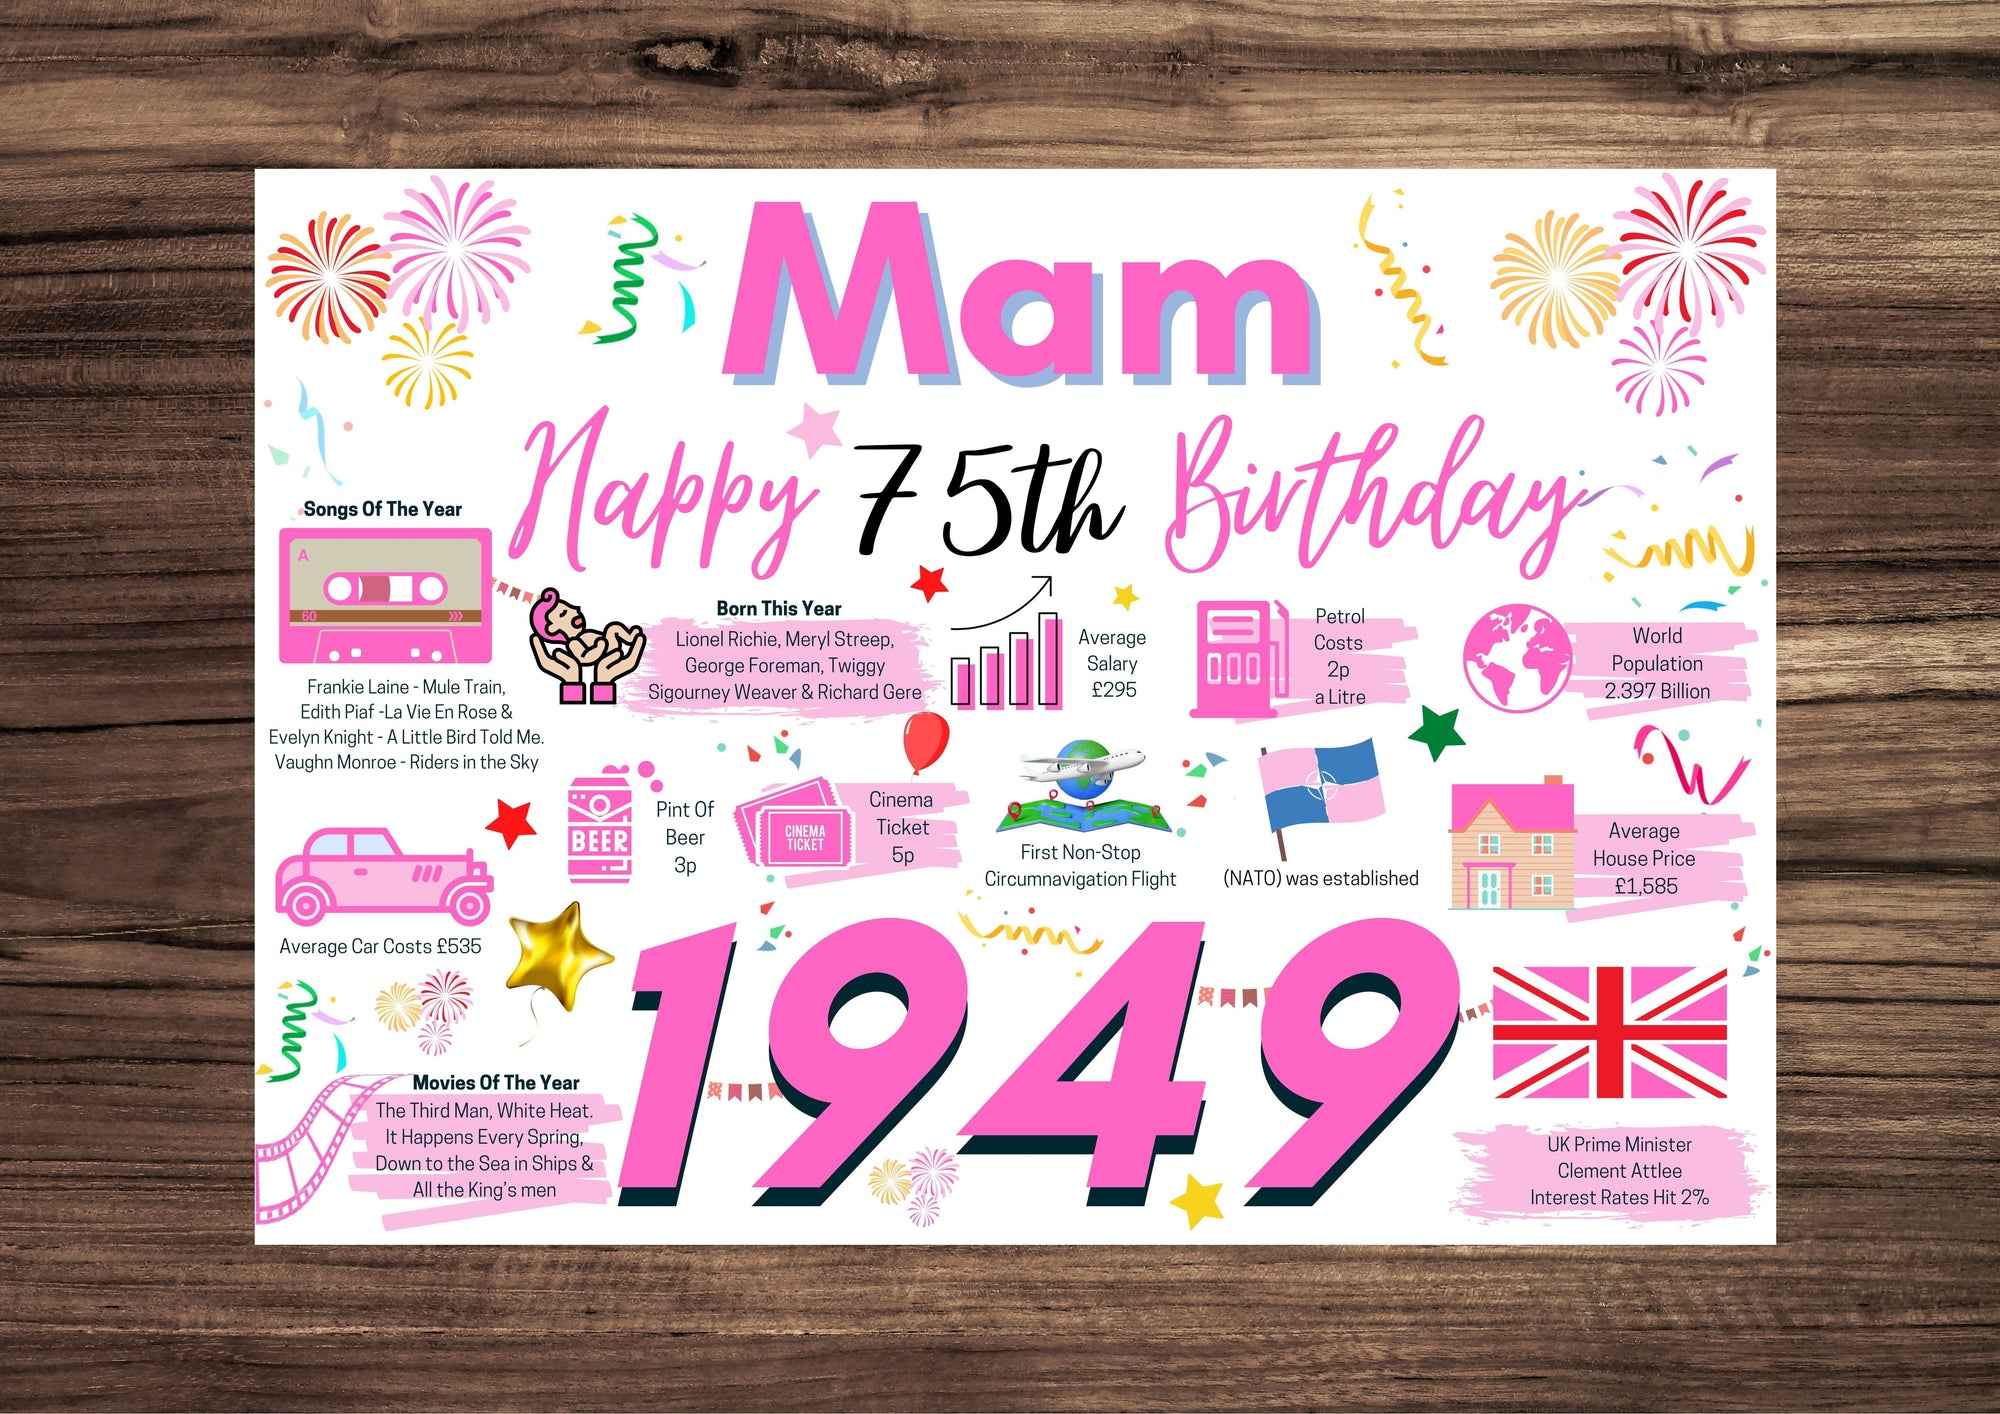 75th Birthday Card For Mam, Birthday Card 75 For Her, Happy 75th Greetings Card Born In 1949 Facts Milestone